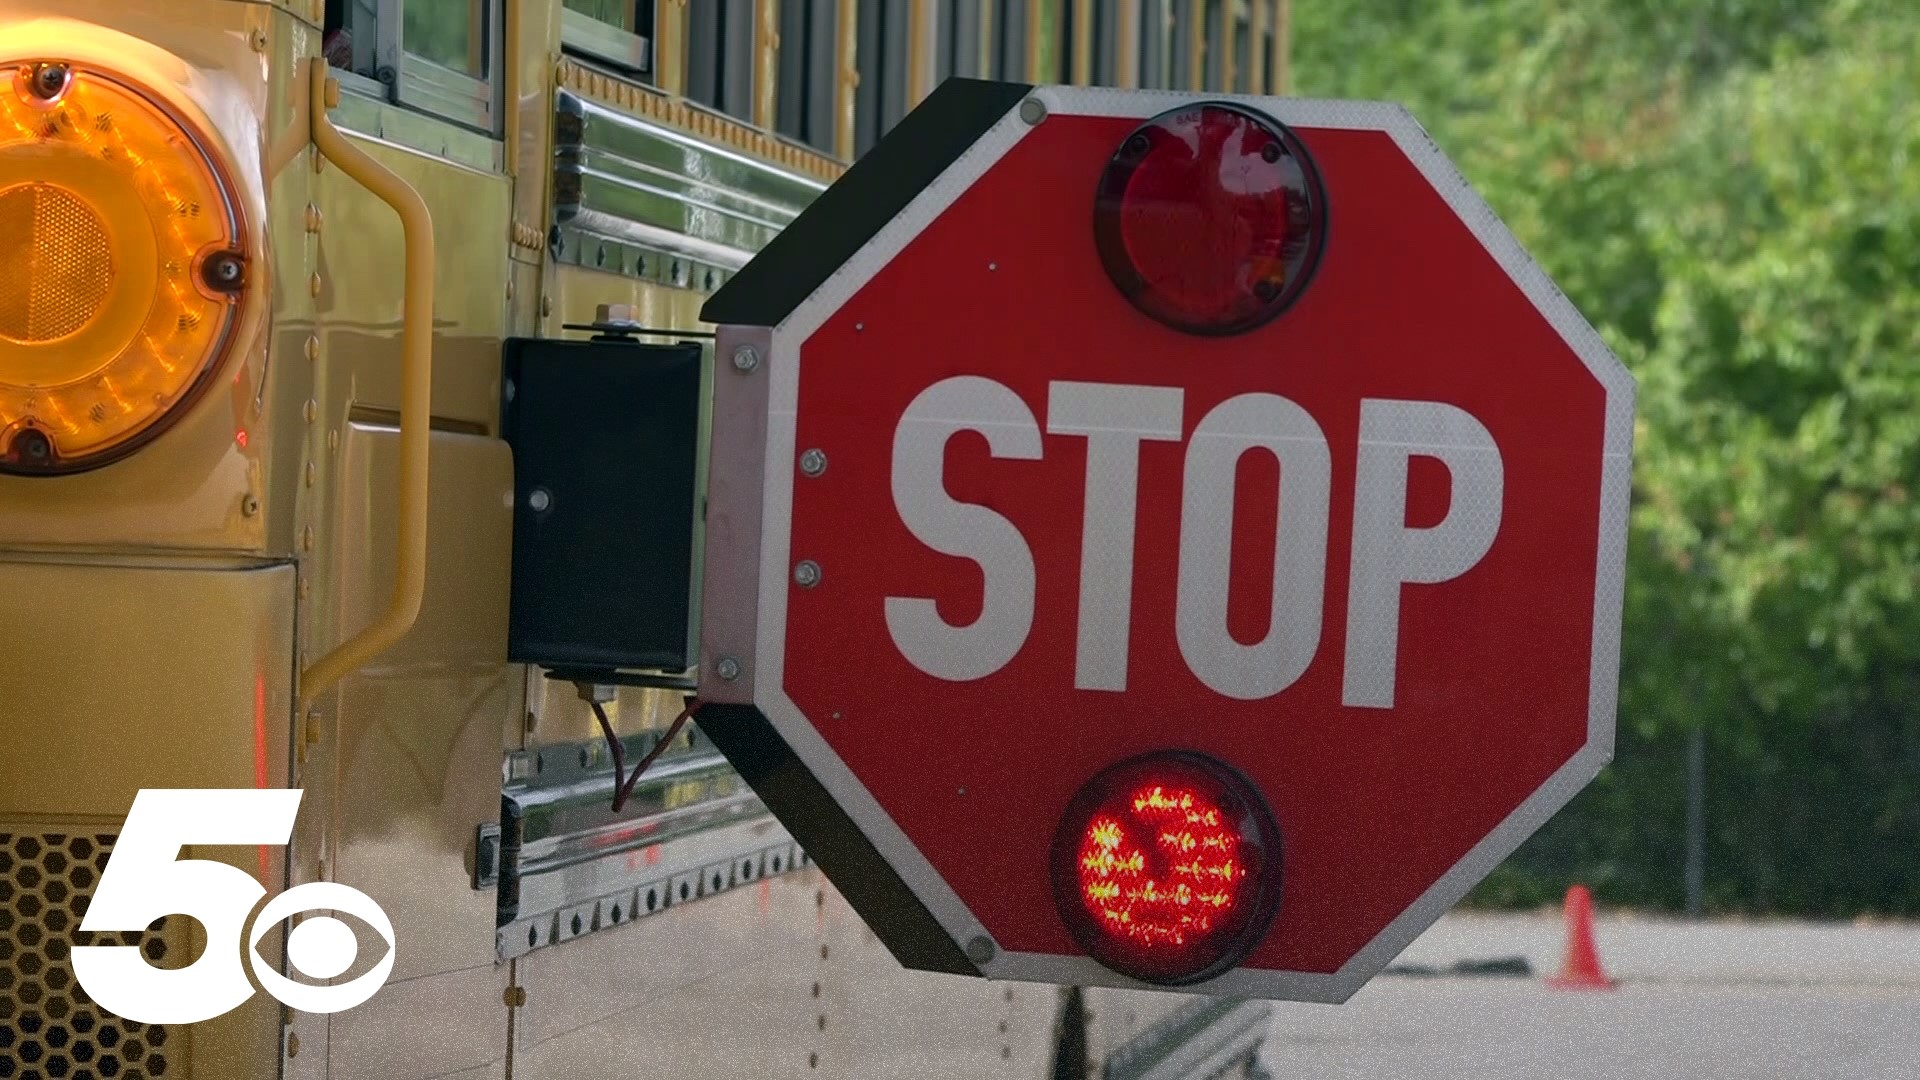 Districts in our area don’t have enough school bus drivers to run their routes and get their students to school.